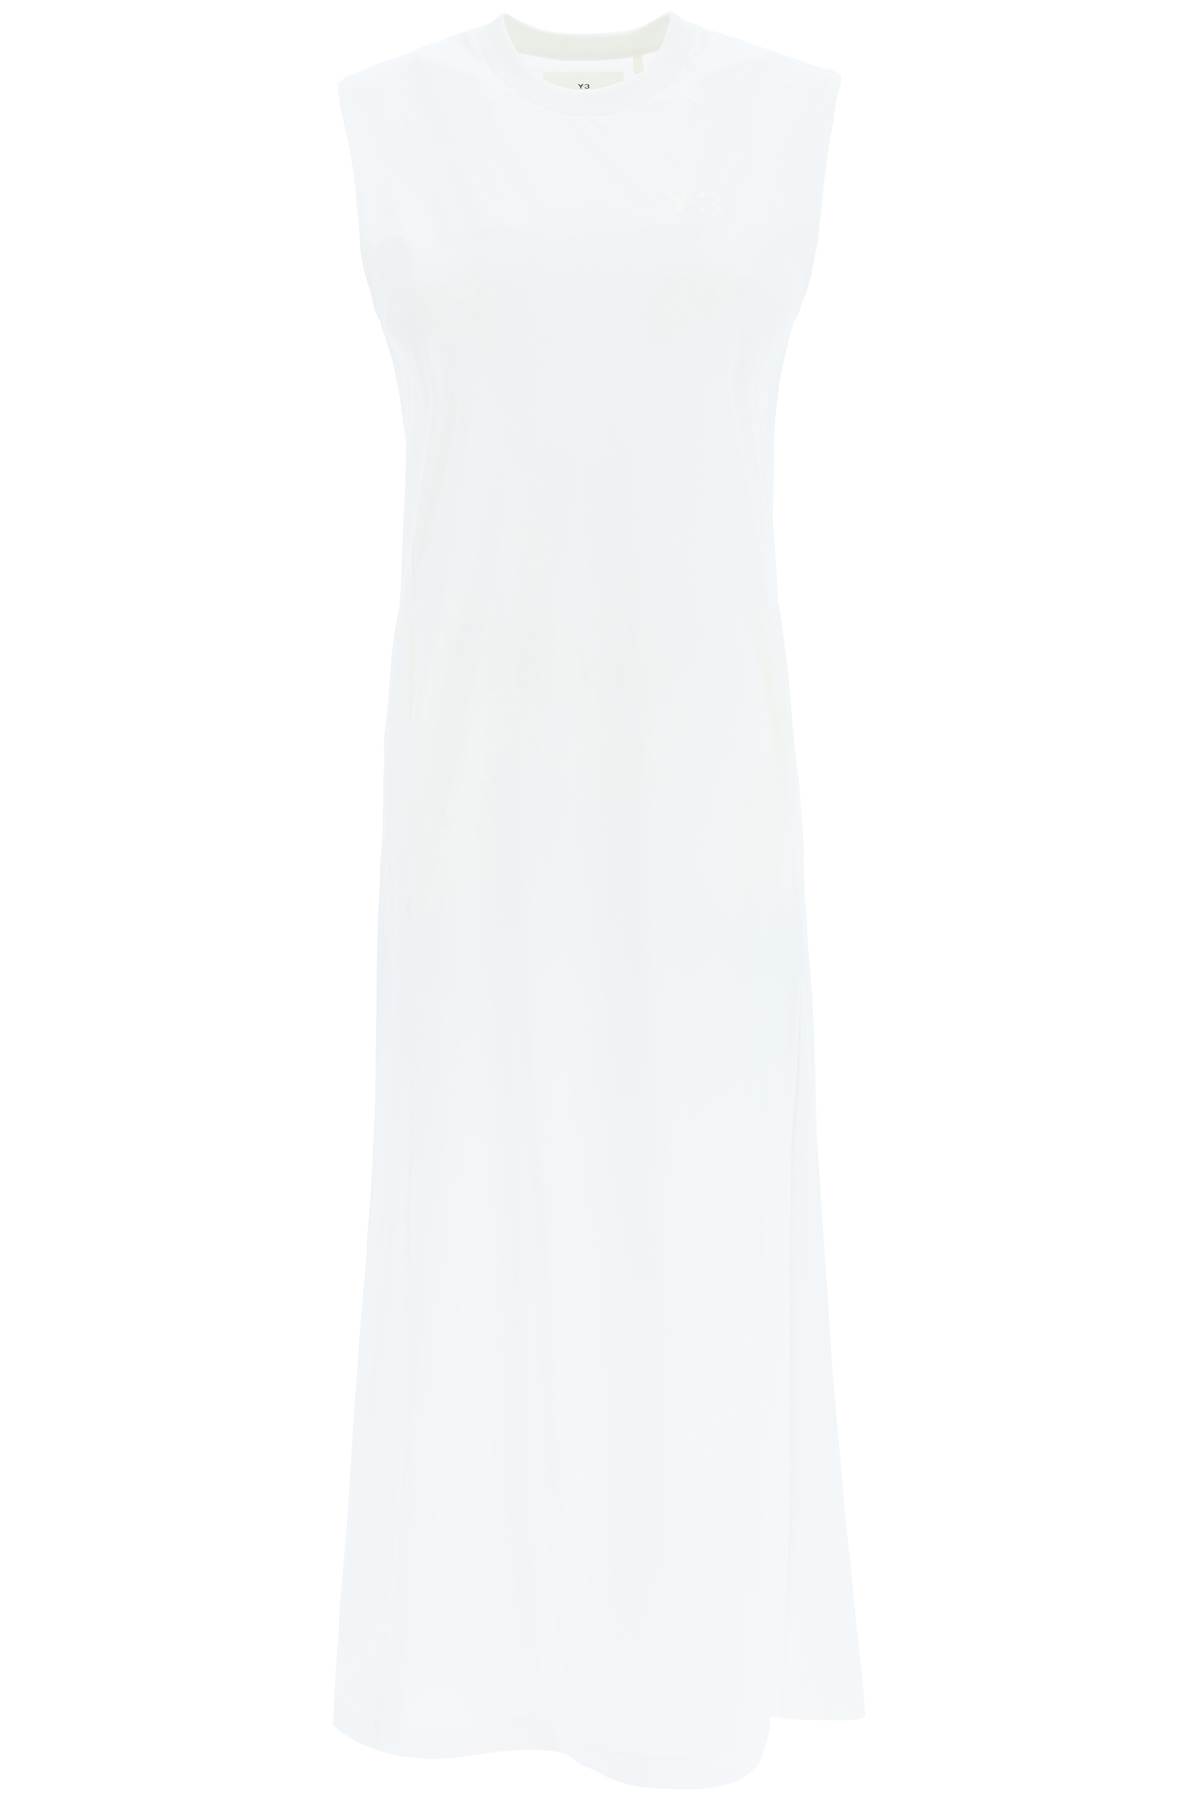 Y-3 3-STRIPES MAXI DRESS WITH CUT-OUT DETAIL